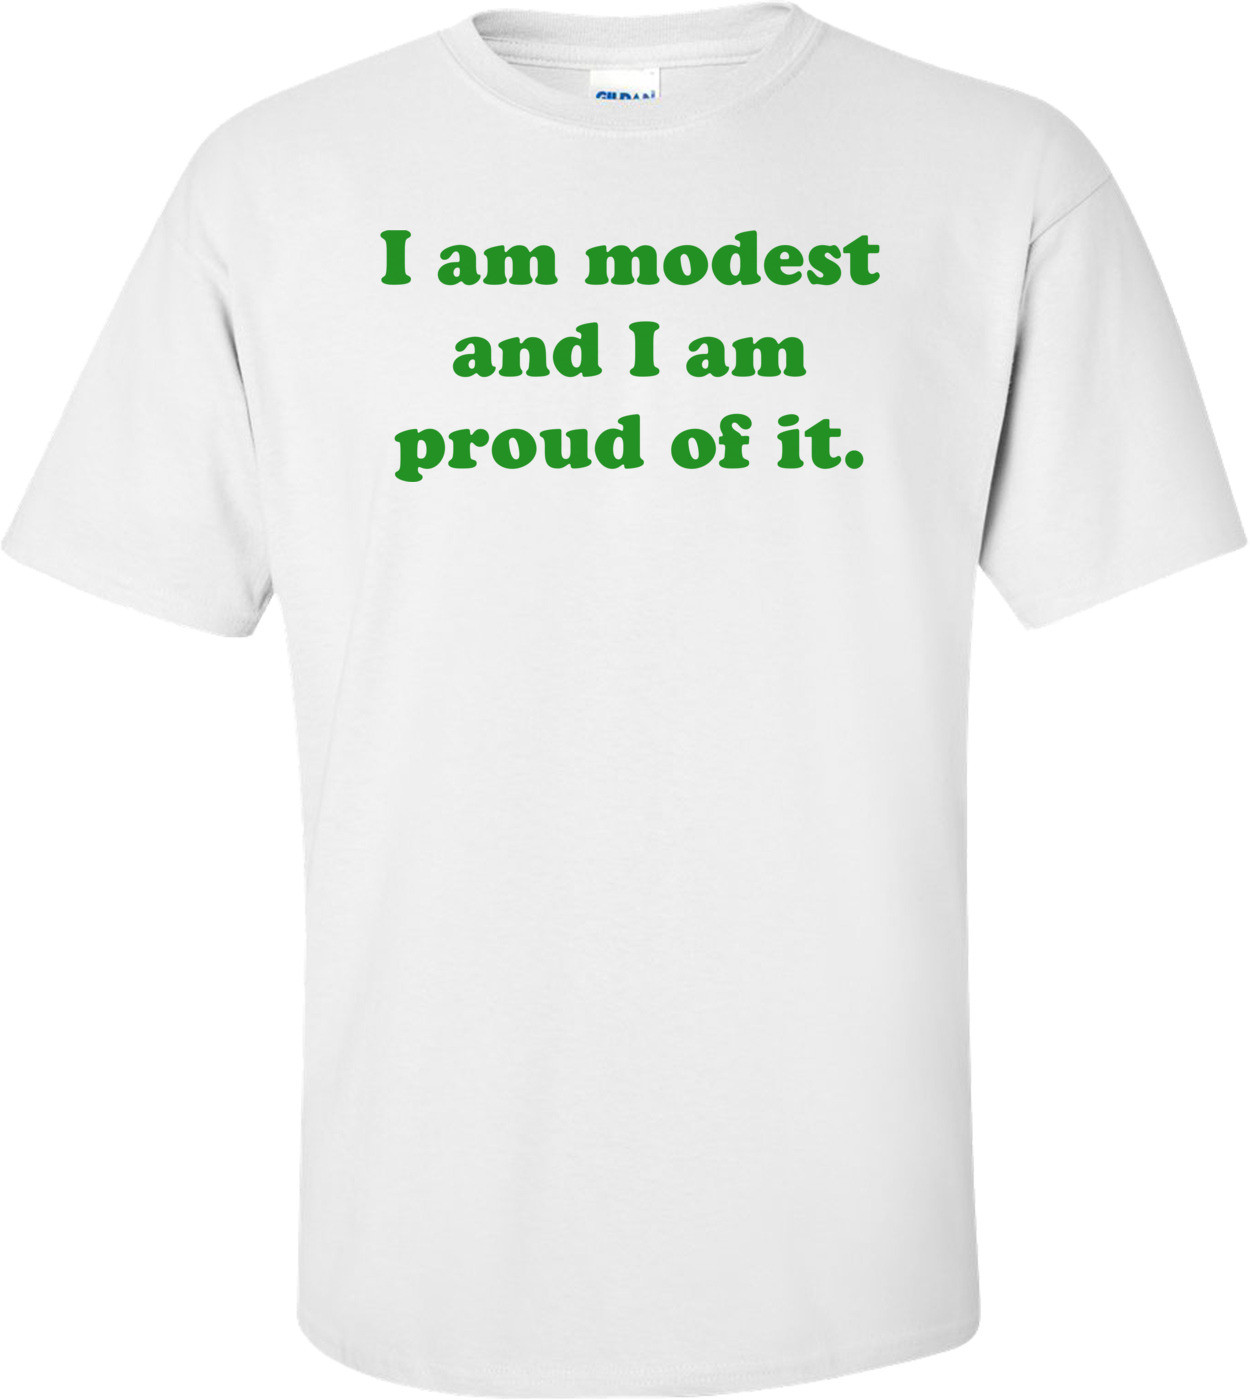 I am modest and I am proud of it.